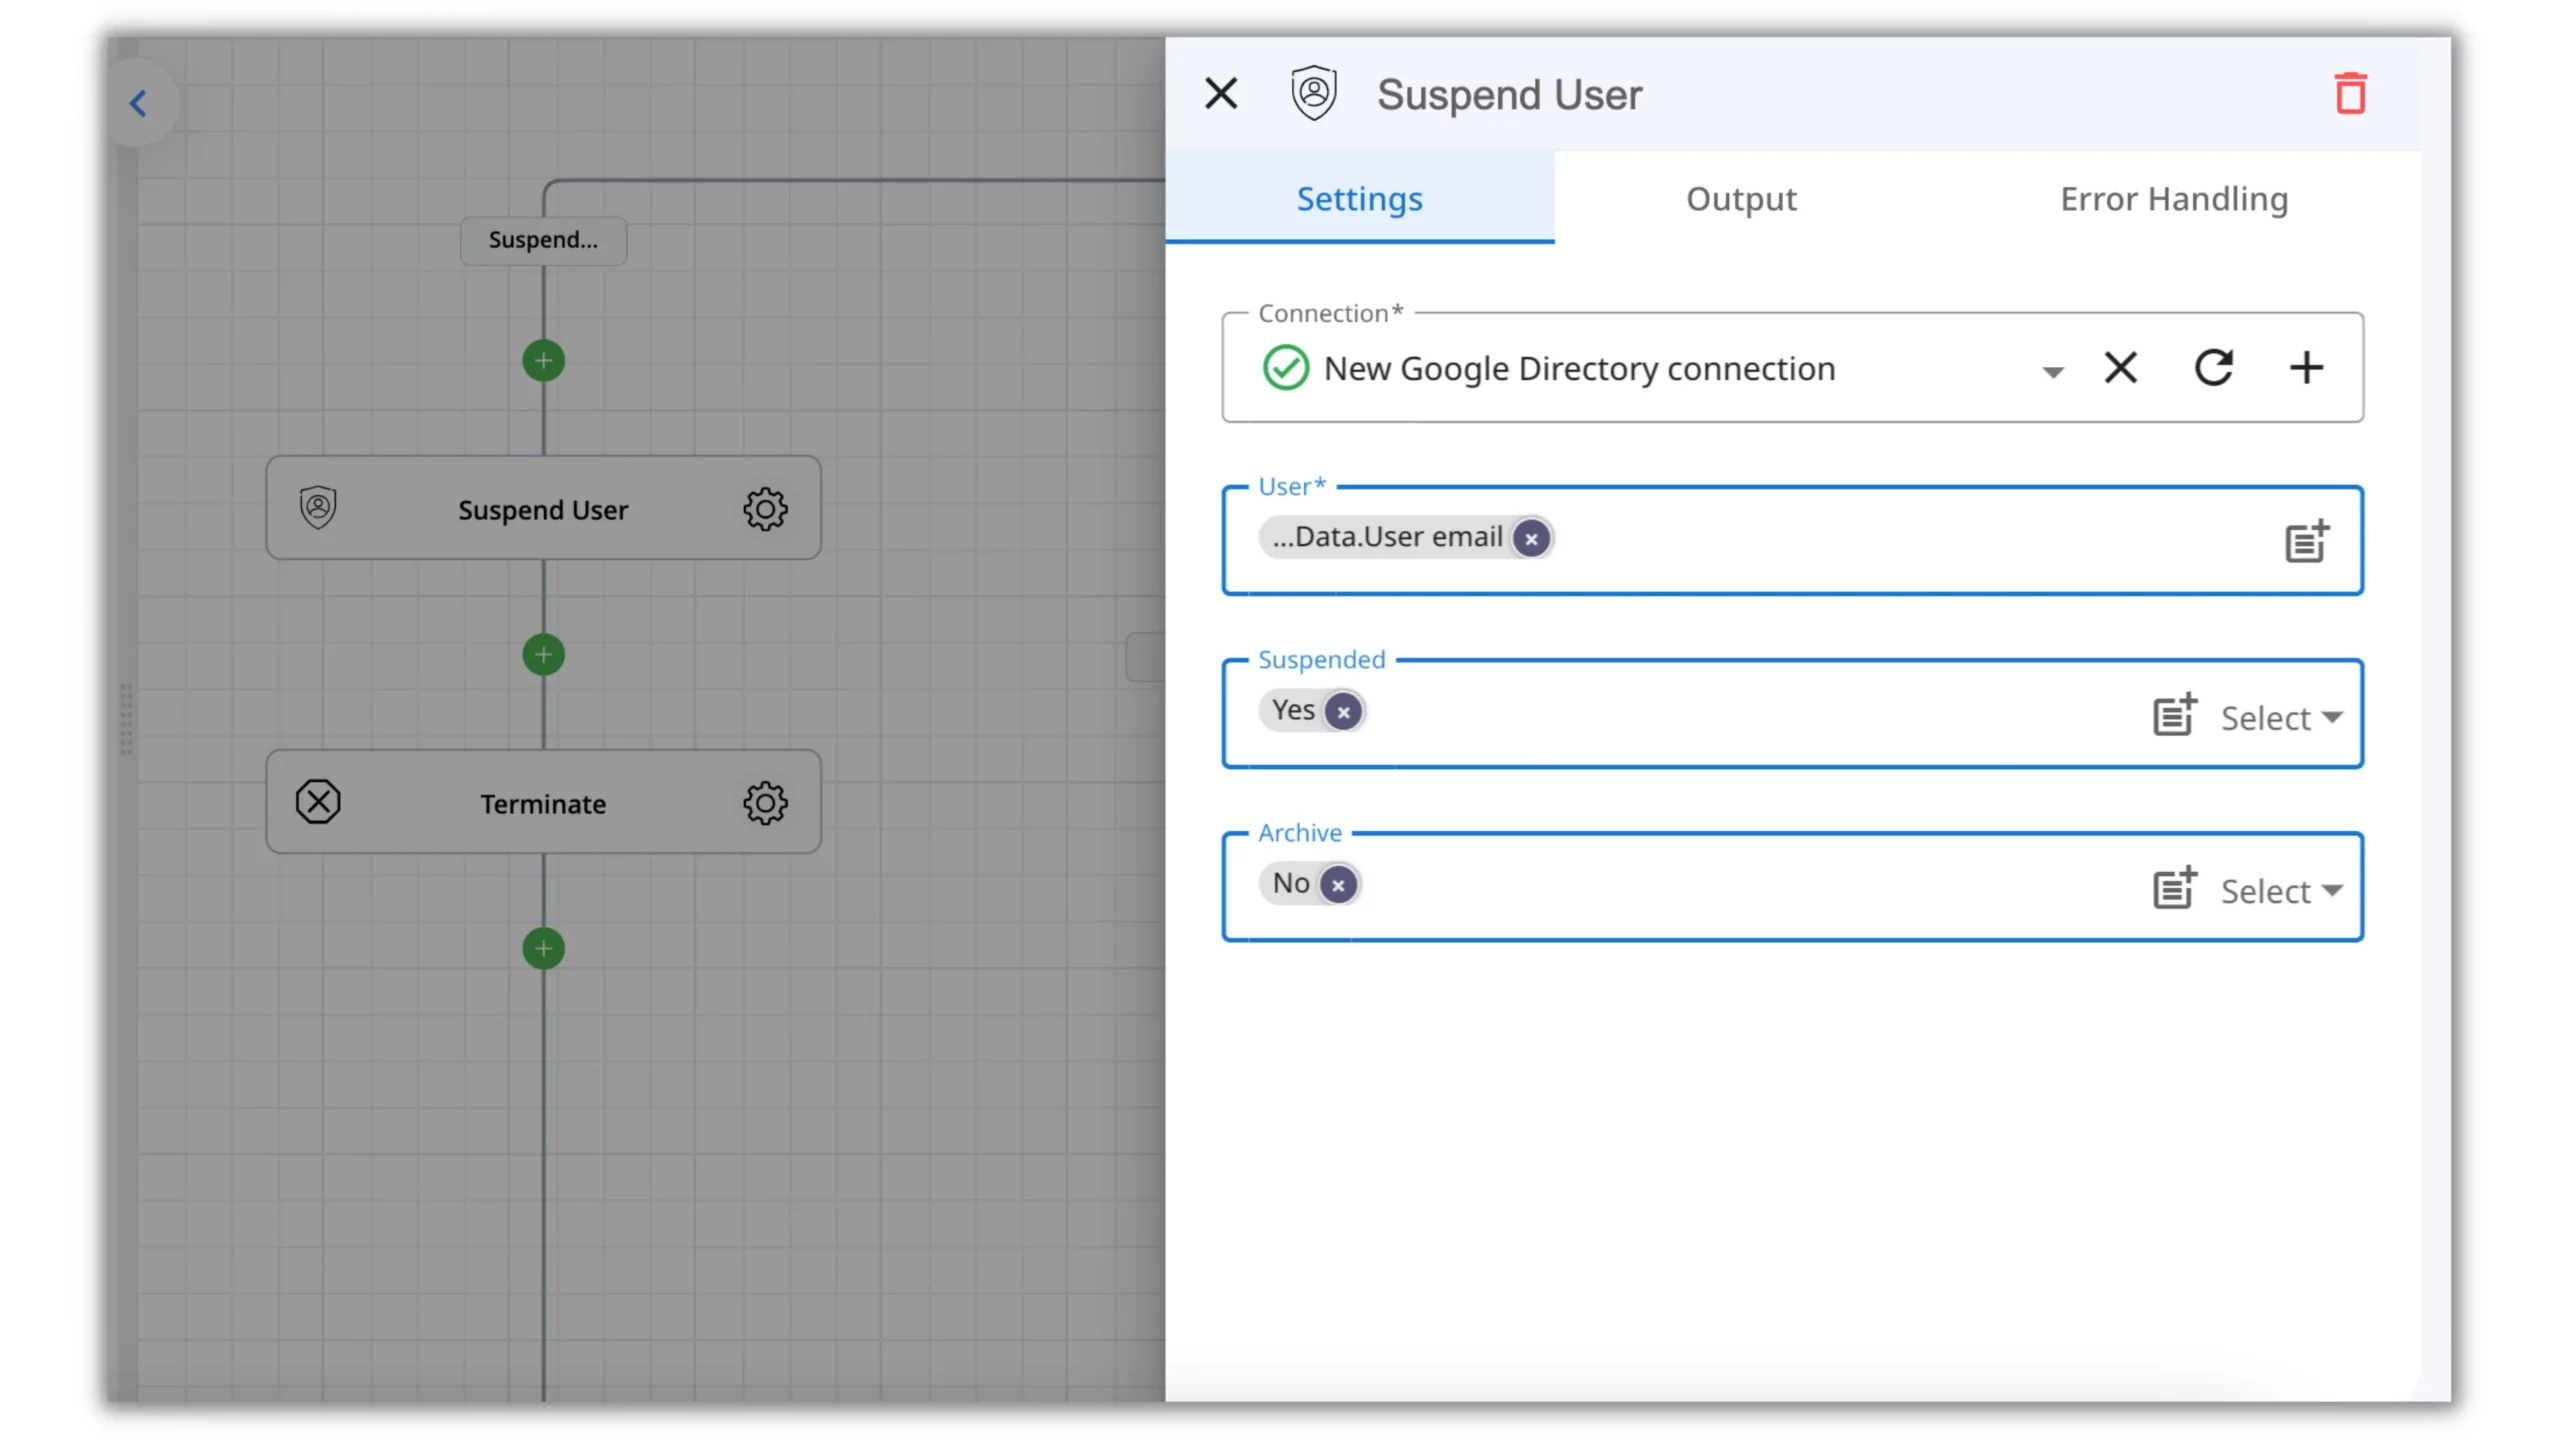 The demonstration of the "suspend user" action in the employee offboarding flow.